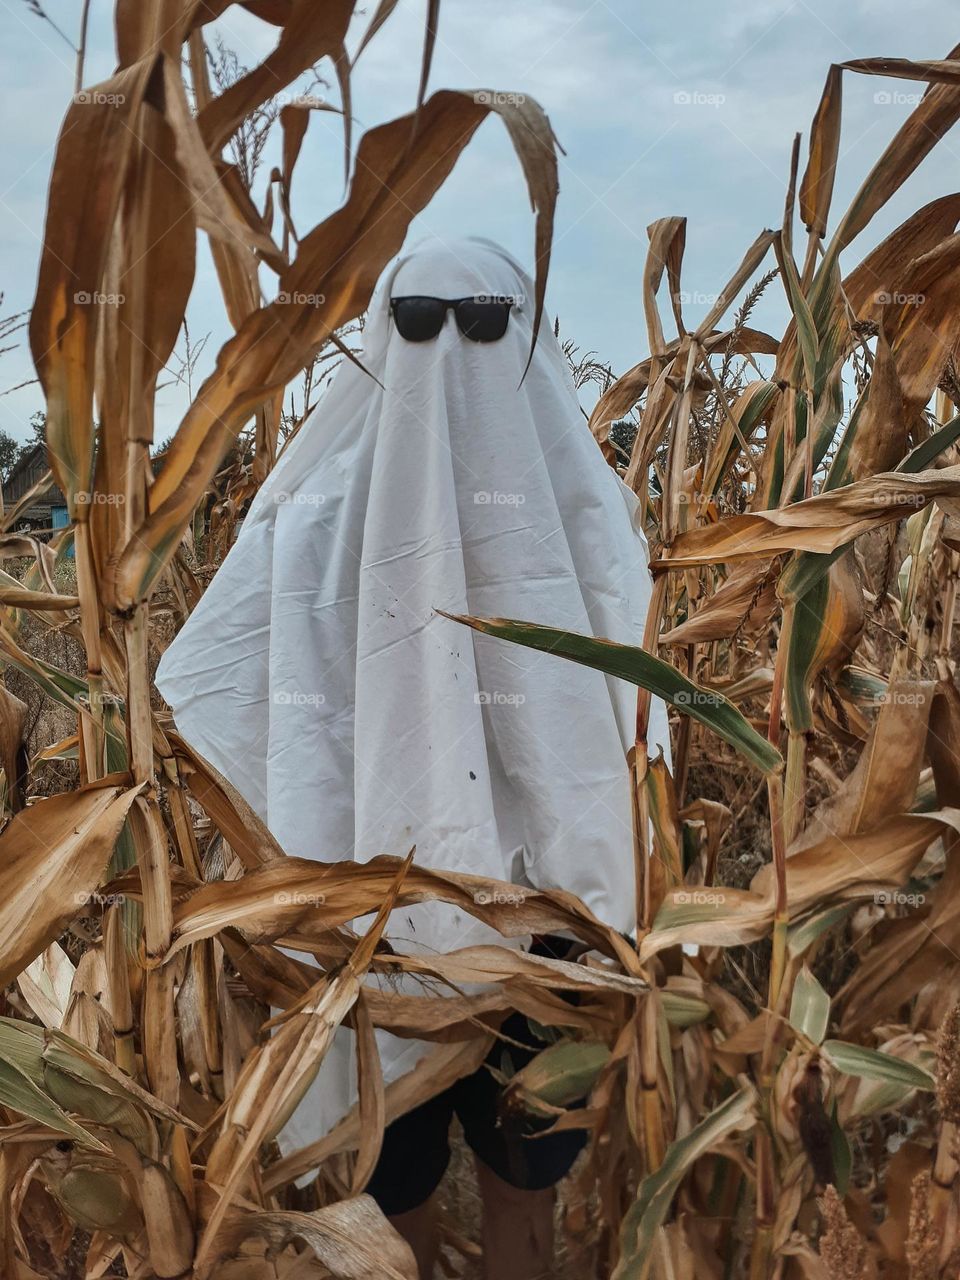 Halloween costume photo of a ghost among the autumn corn and autumn plants